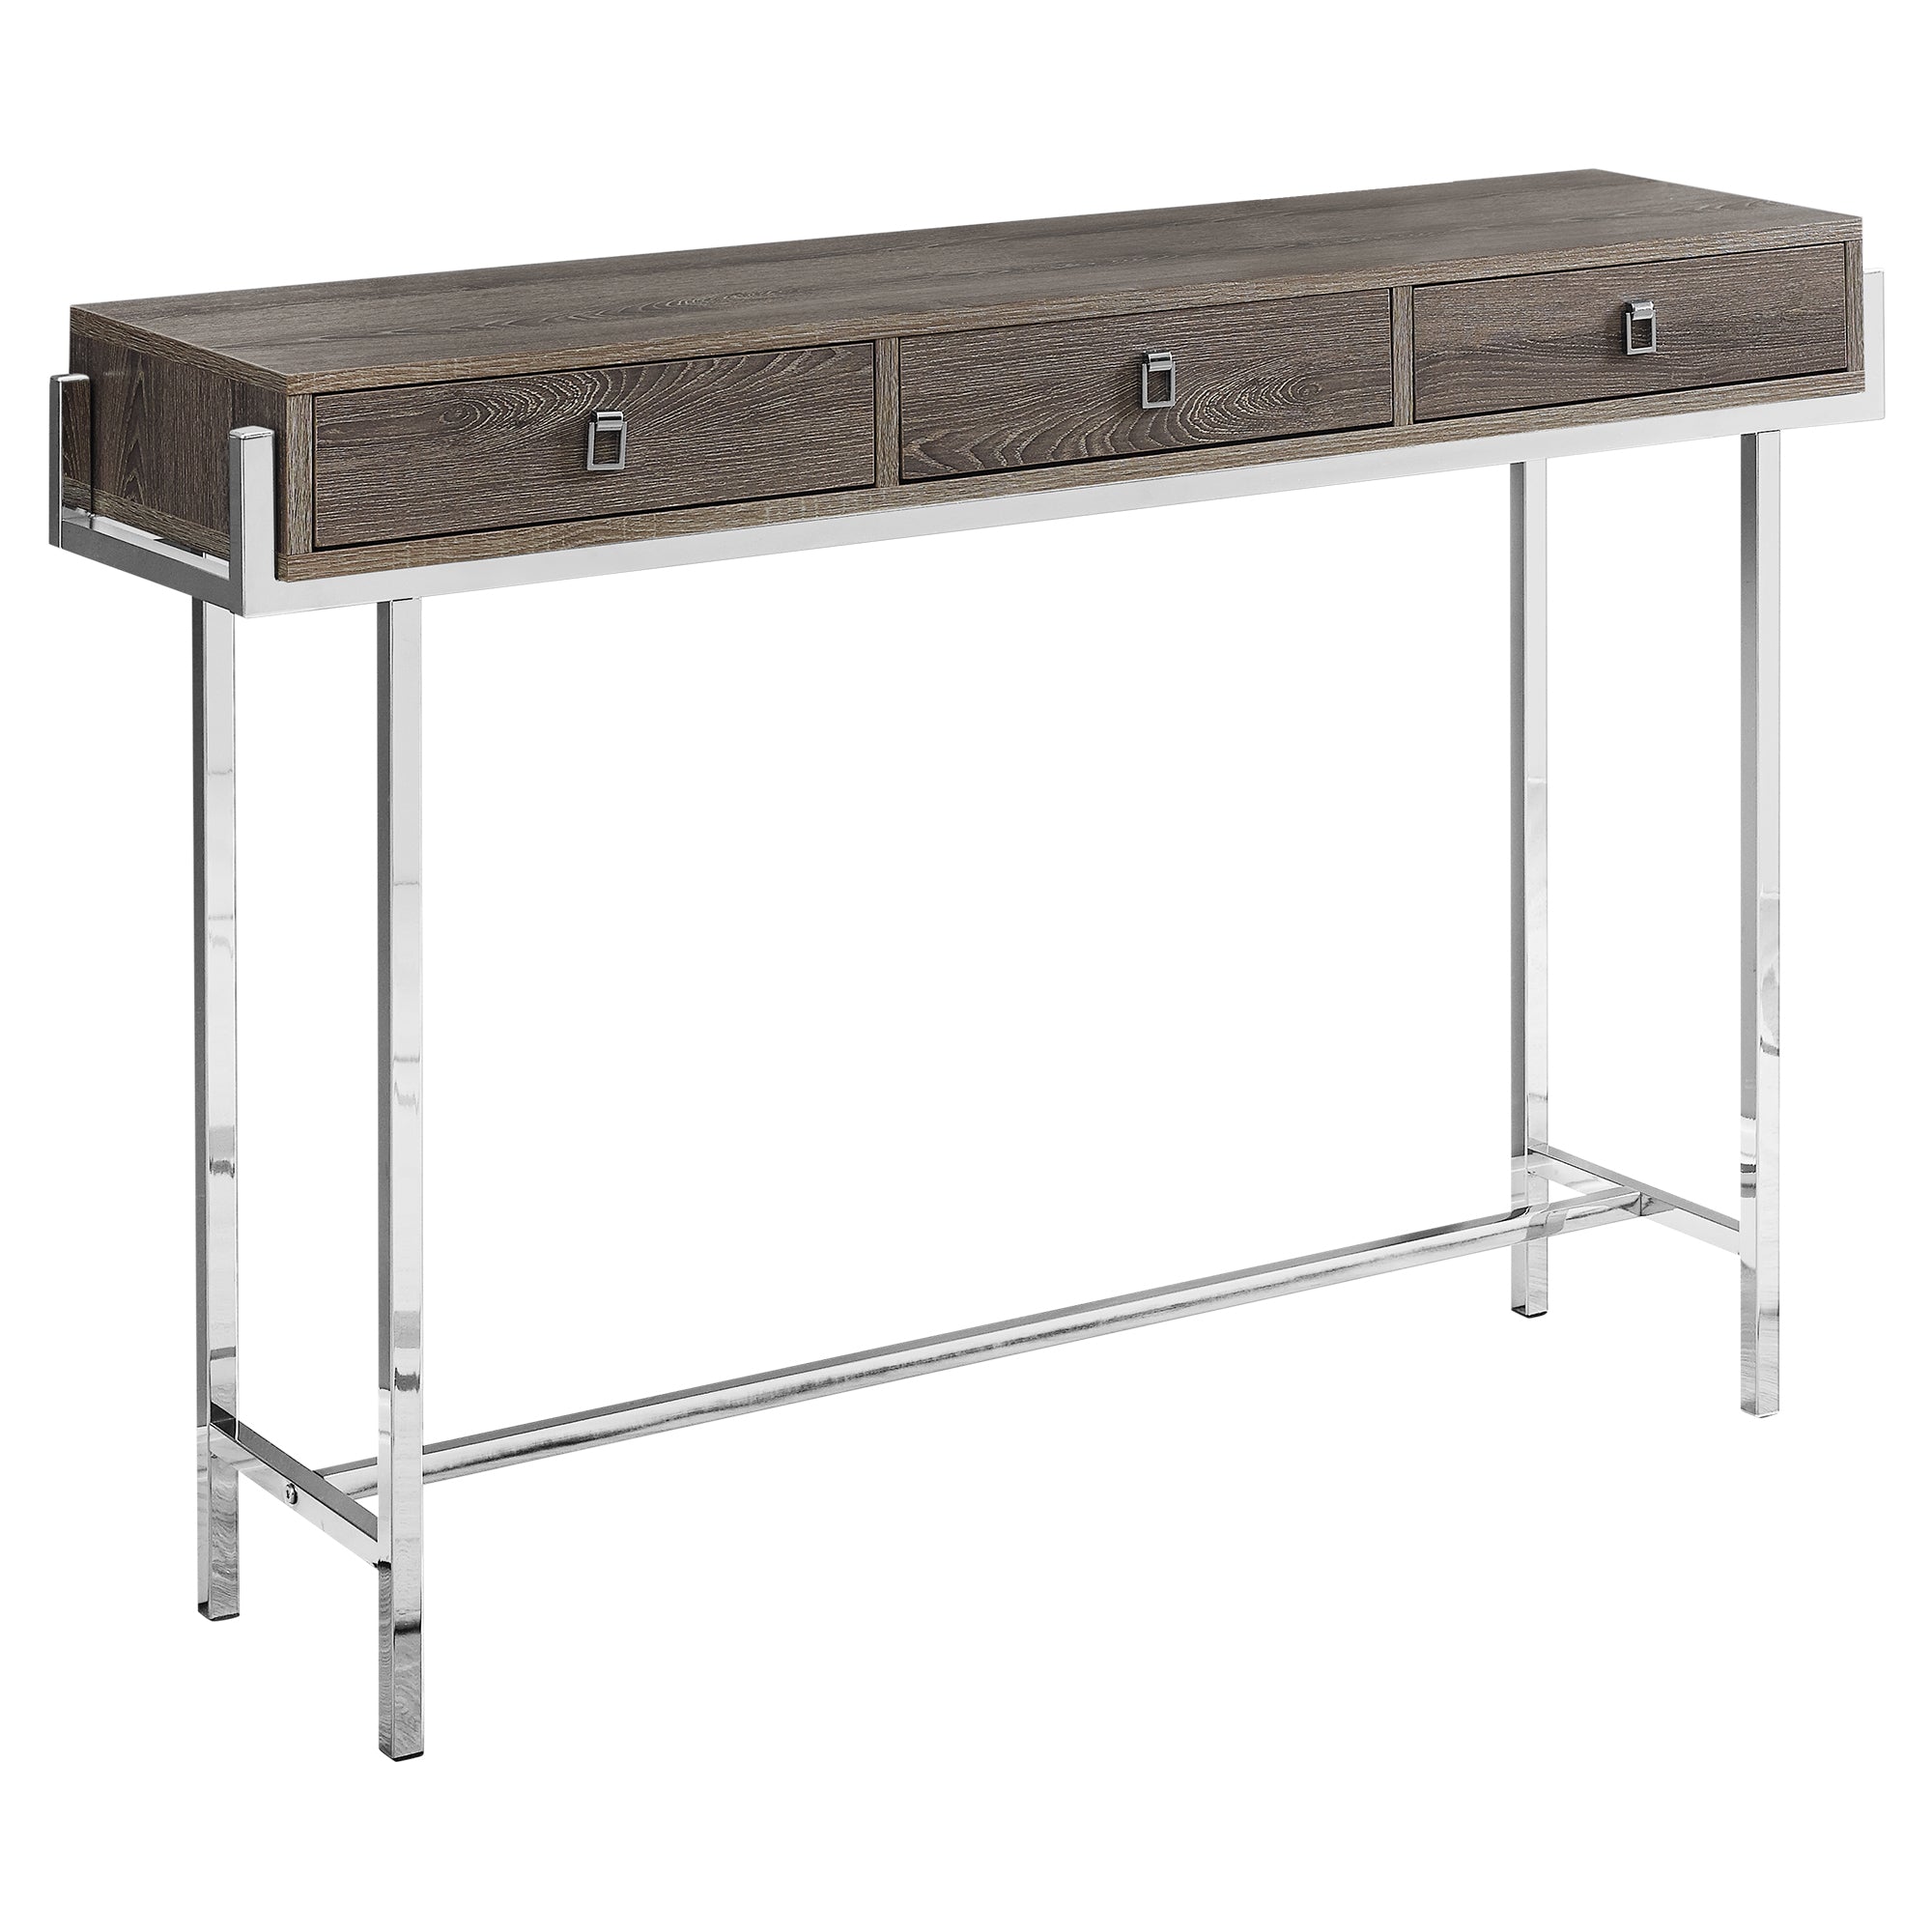 MN-193299    Accent Table, Console, Entryway, Narrow, Sofa, Living Room, Bedroom, Metal Legs, Laminate, Dark Taupe, Chrome, Contemporary, Modern